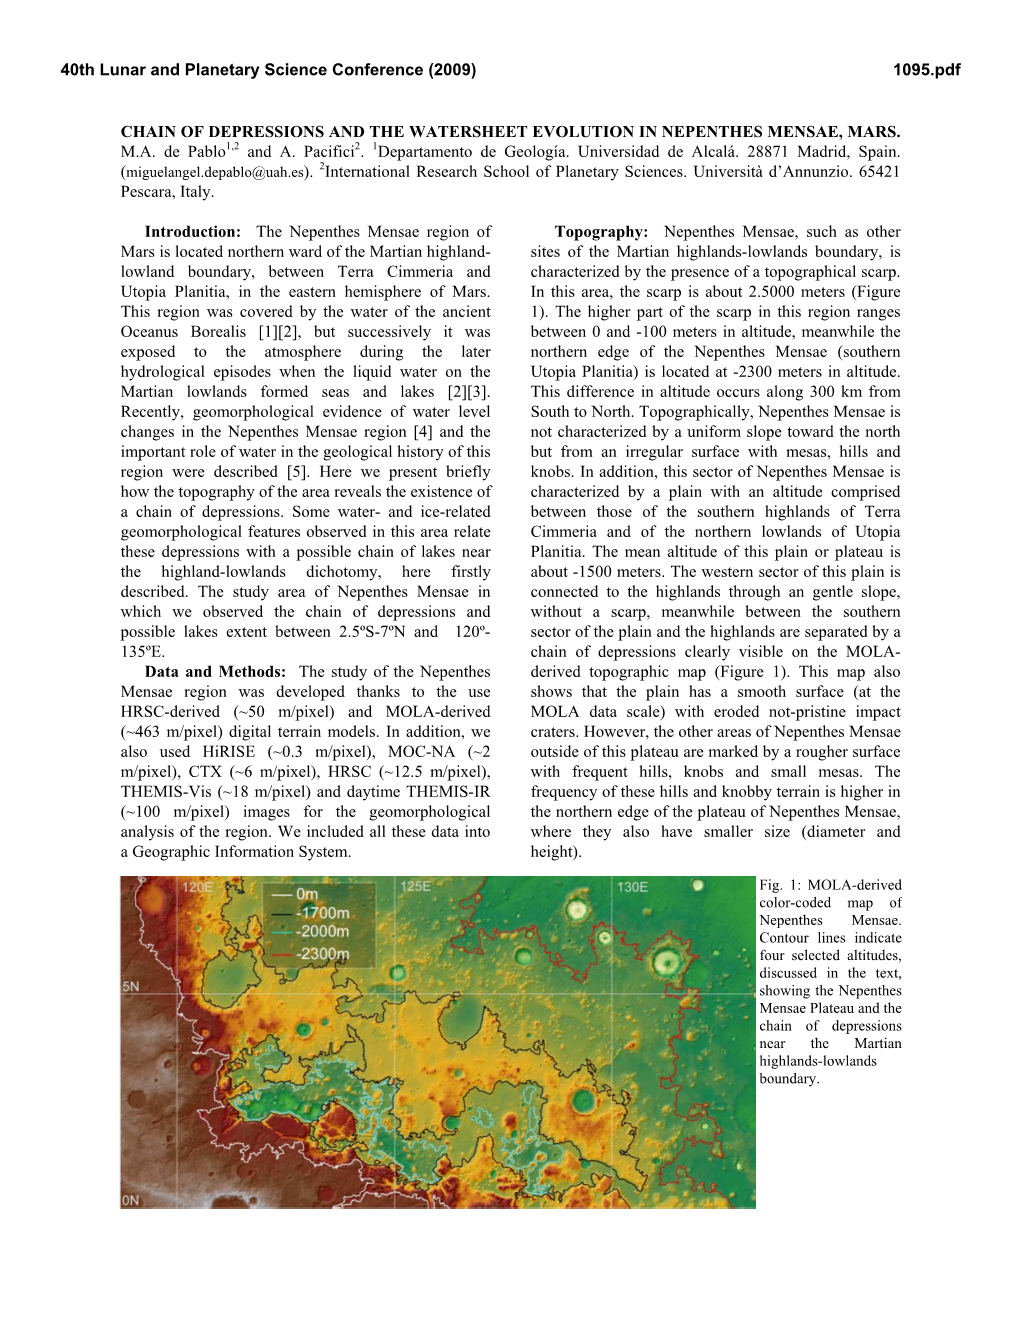 Chain of Depressions and the Watersheet Evolution in Nepenthes Mensae, Mars